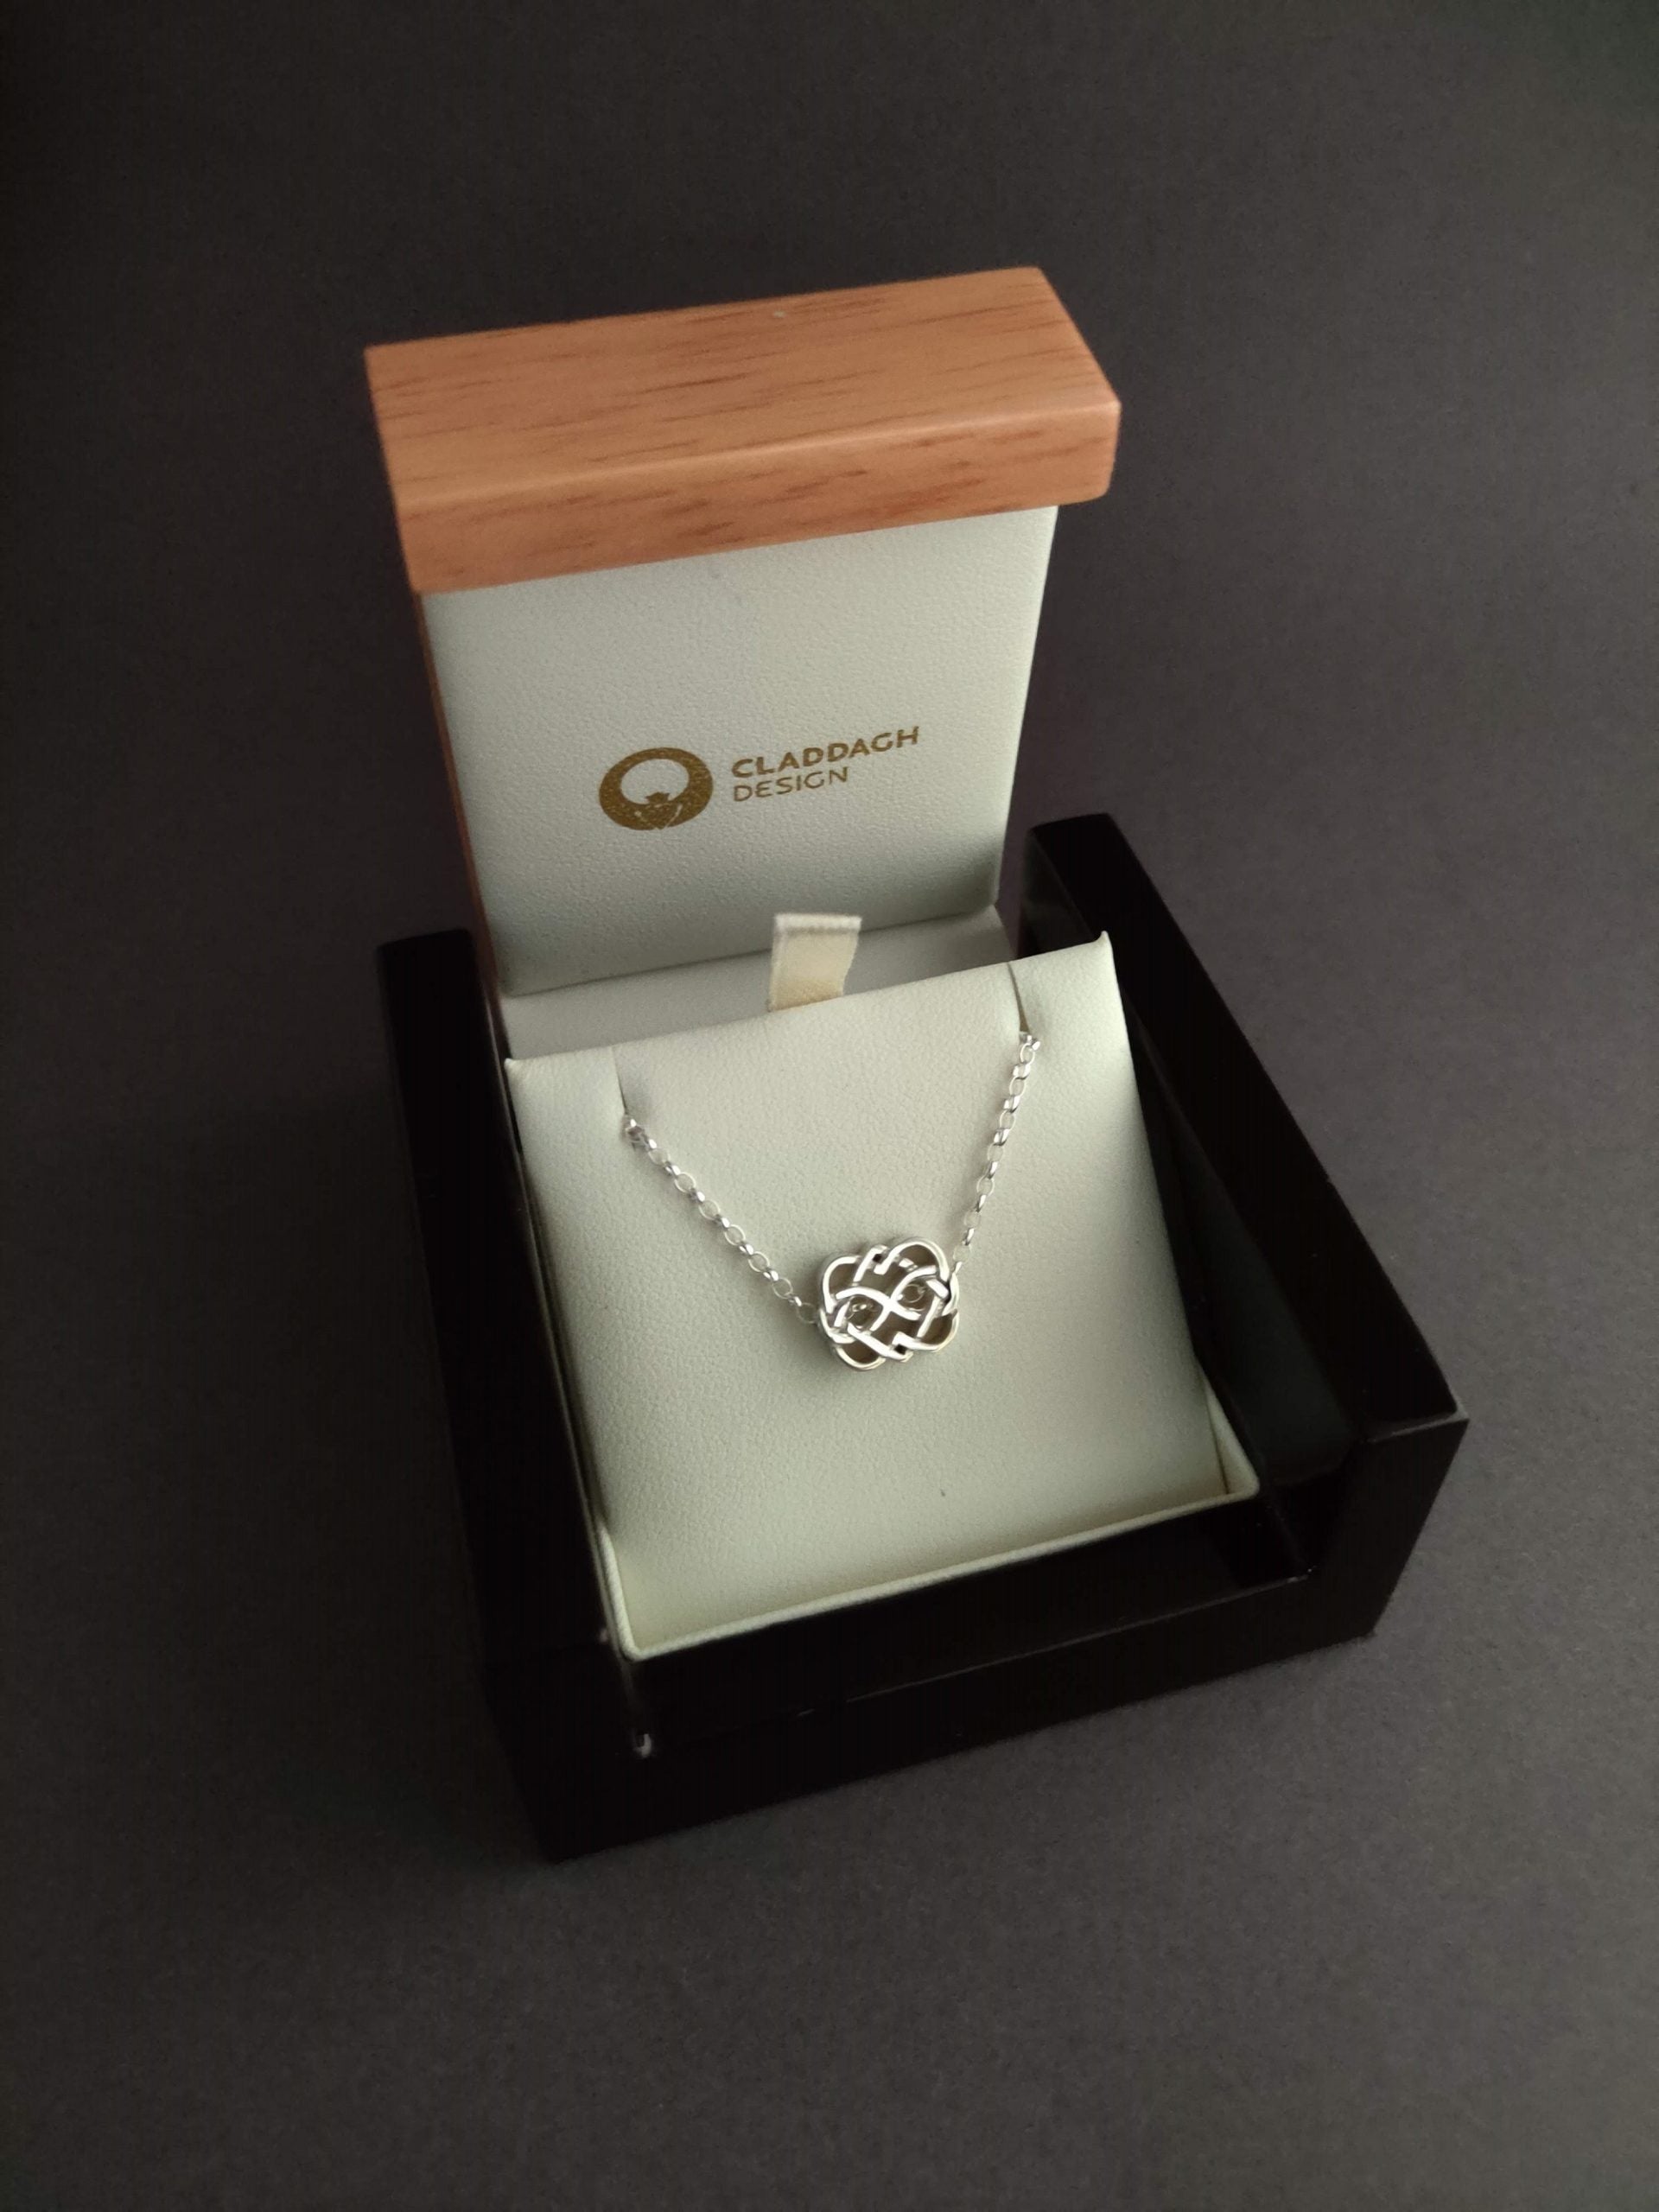 Celtic love knot pendant with chain in box